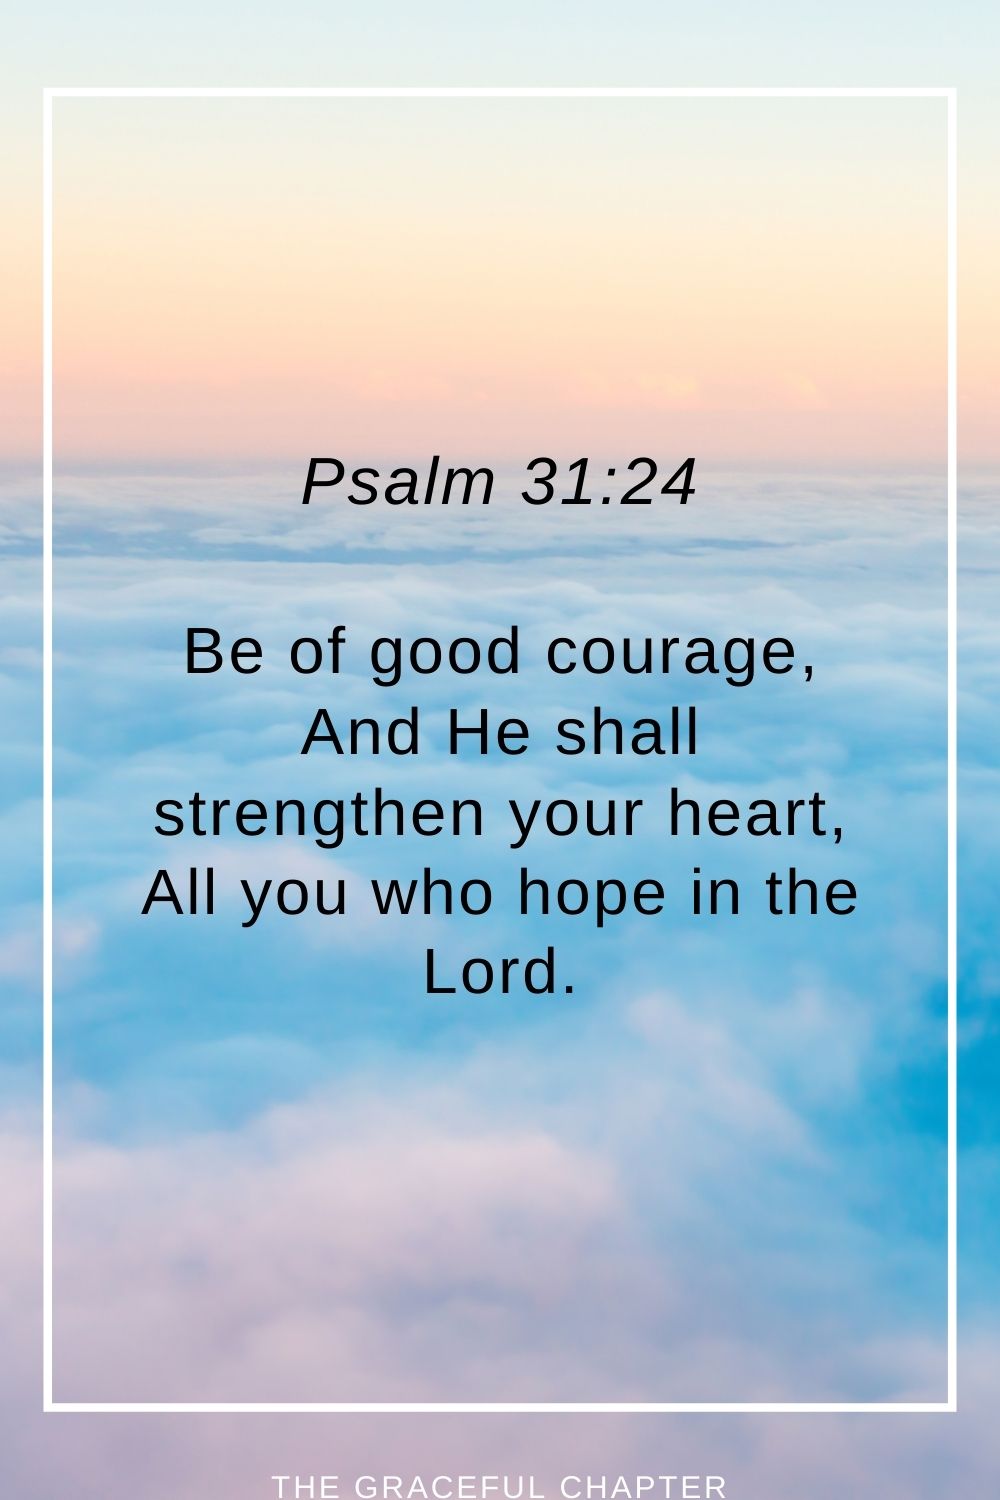 Be of good courage, And He shall strengthen your heart, All you who hope in the Lord. Psalm 31:24